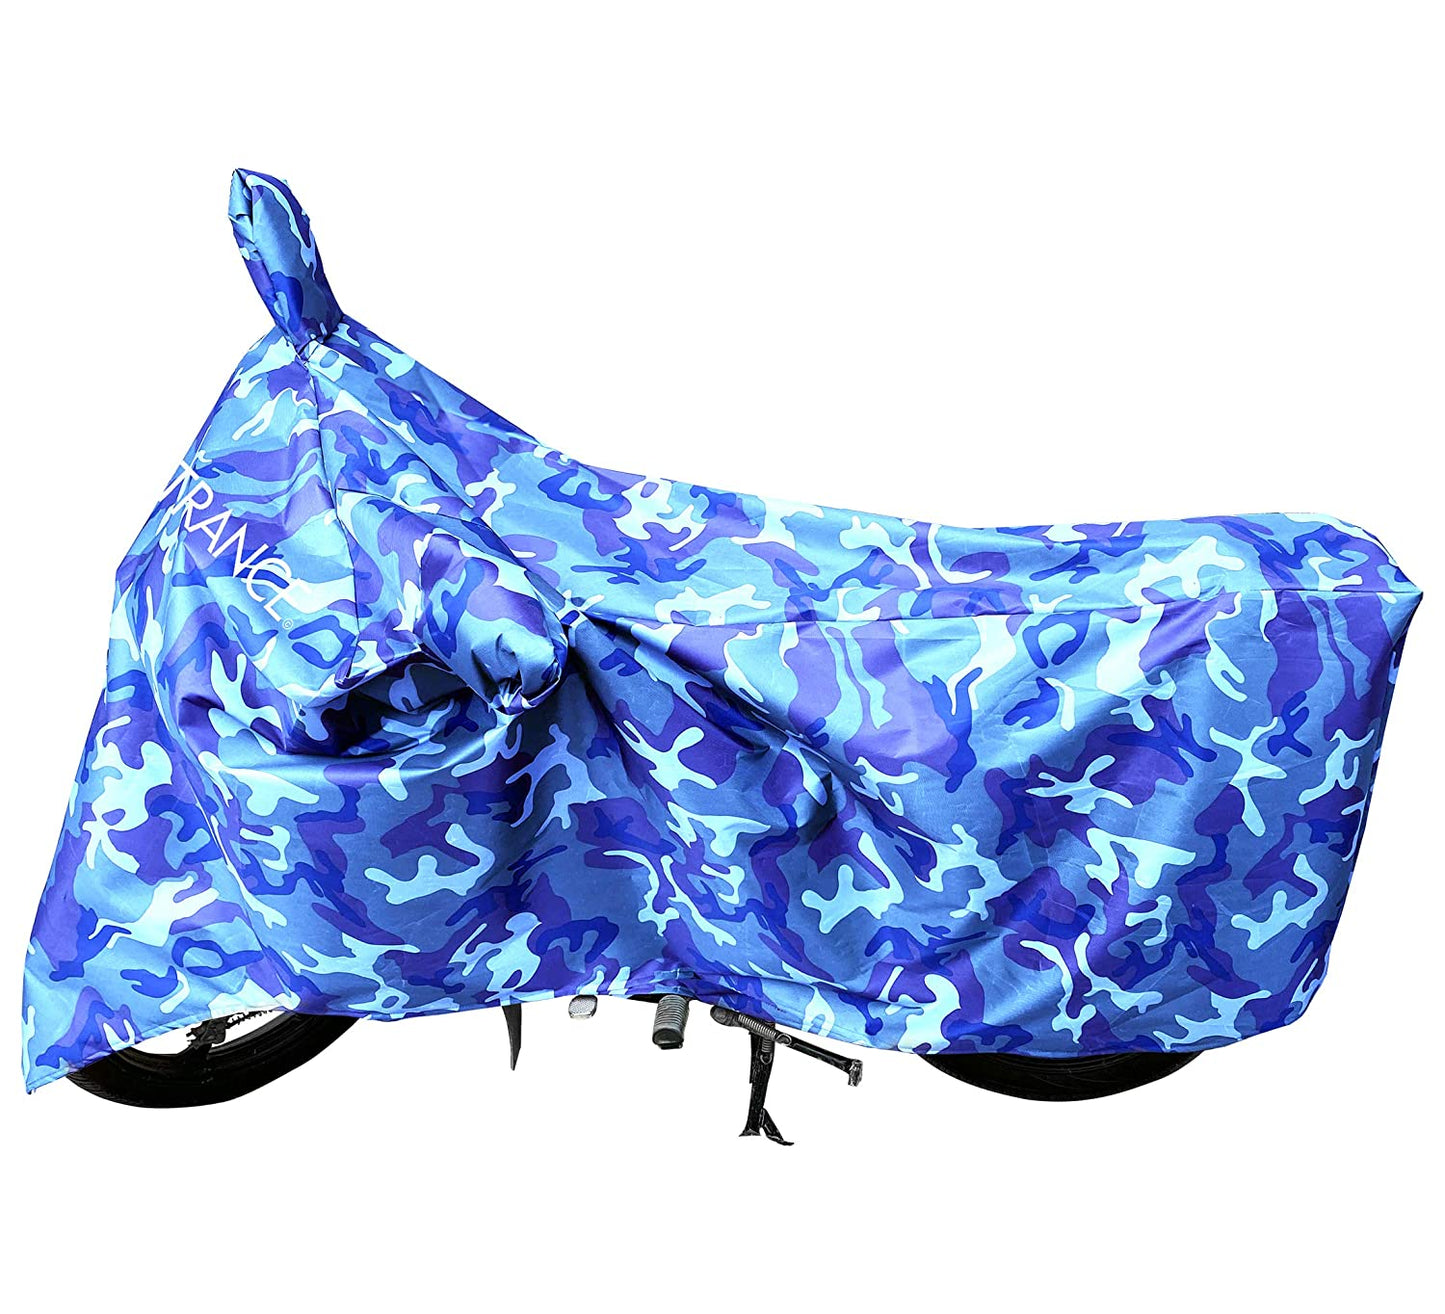 MotoTrance Jungle Bike Body Covers For Honda CB Unicorn 160 - Interlock-Stitched Waterproof and Heat Resistant with Mirror Pockets